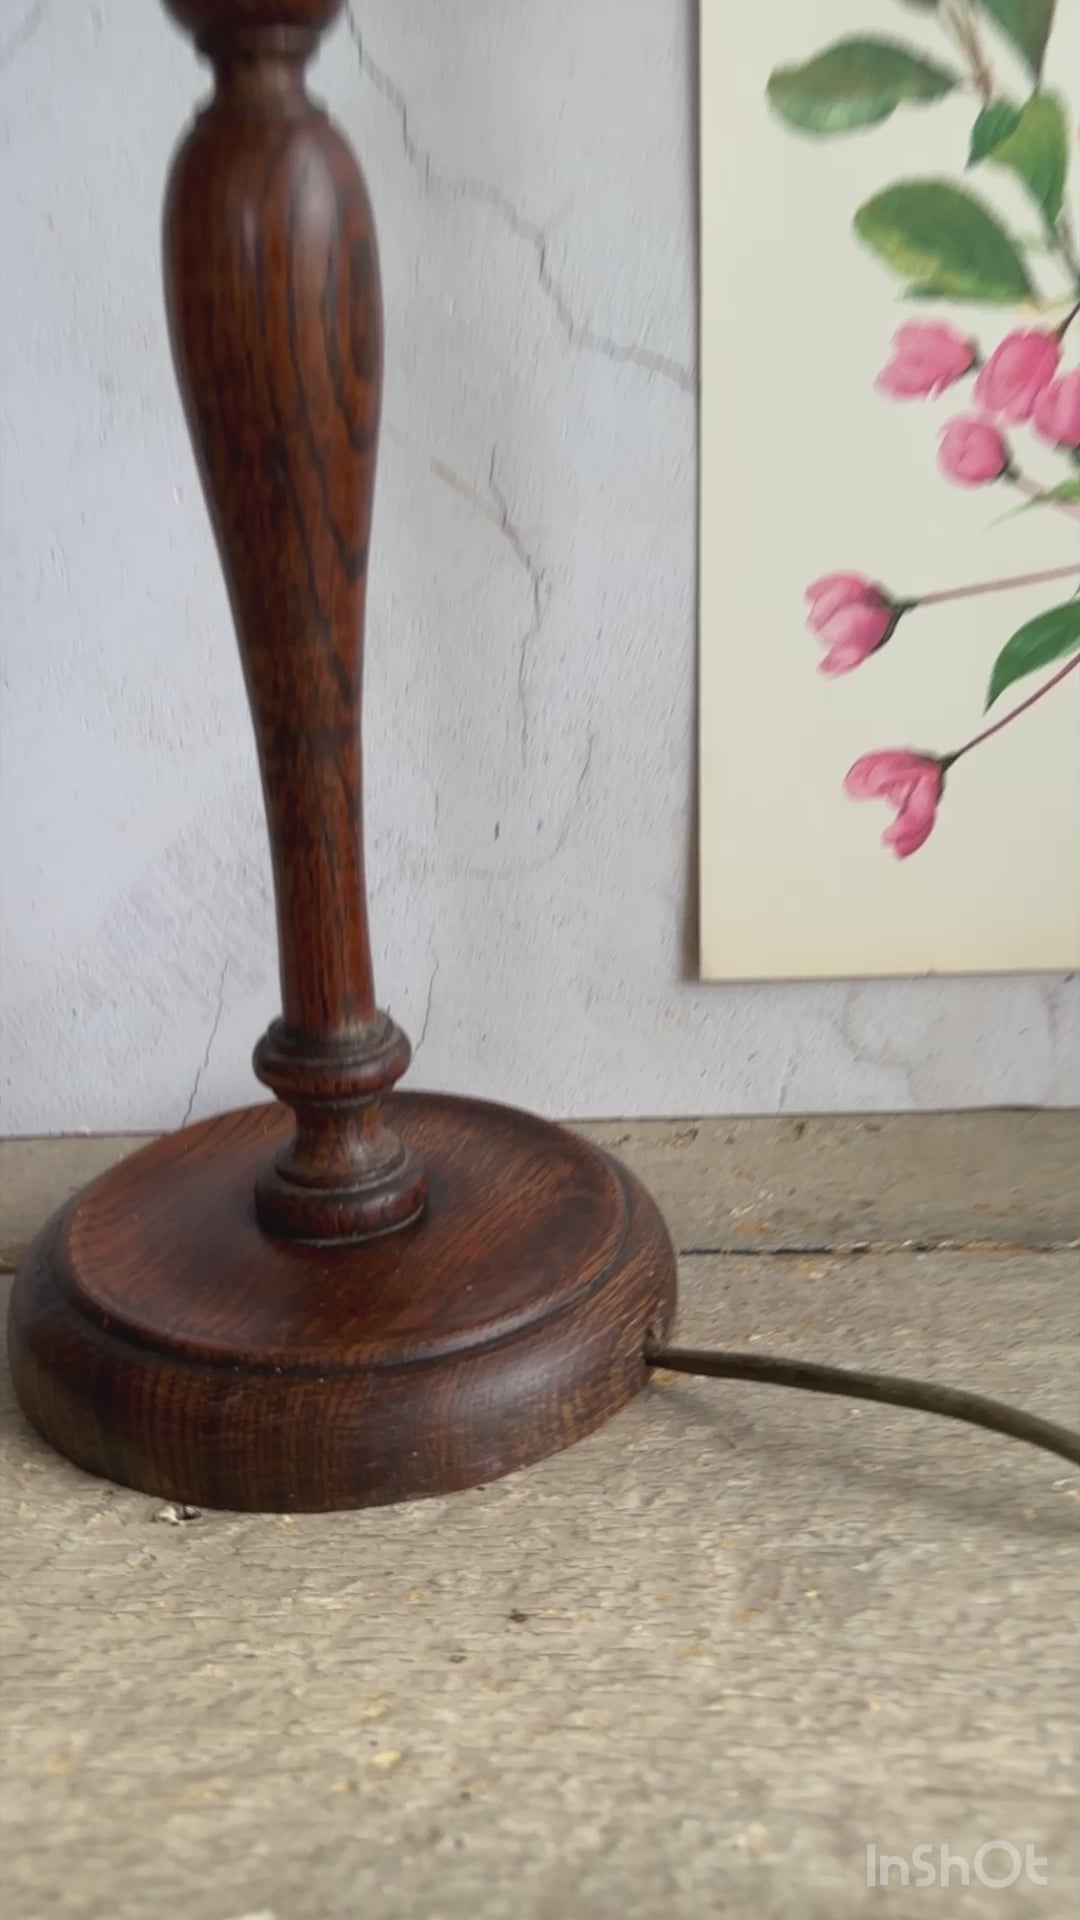 Vintage Wooden Lamp, Lamp Base, Bedside Lamp, Wood Turned, Table Lamp, With Shade, Small Lamp, Cottagecore Decor, Rustic Decor,